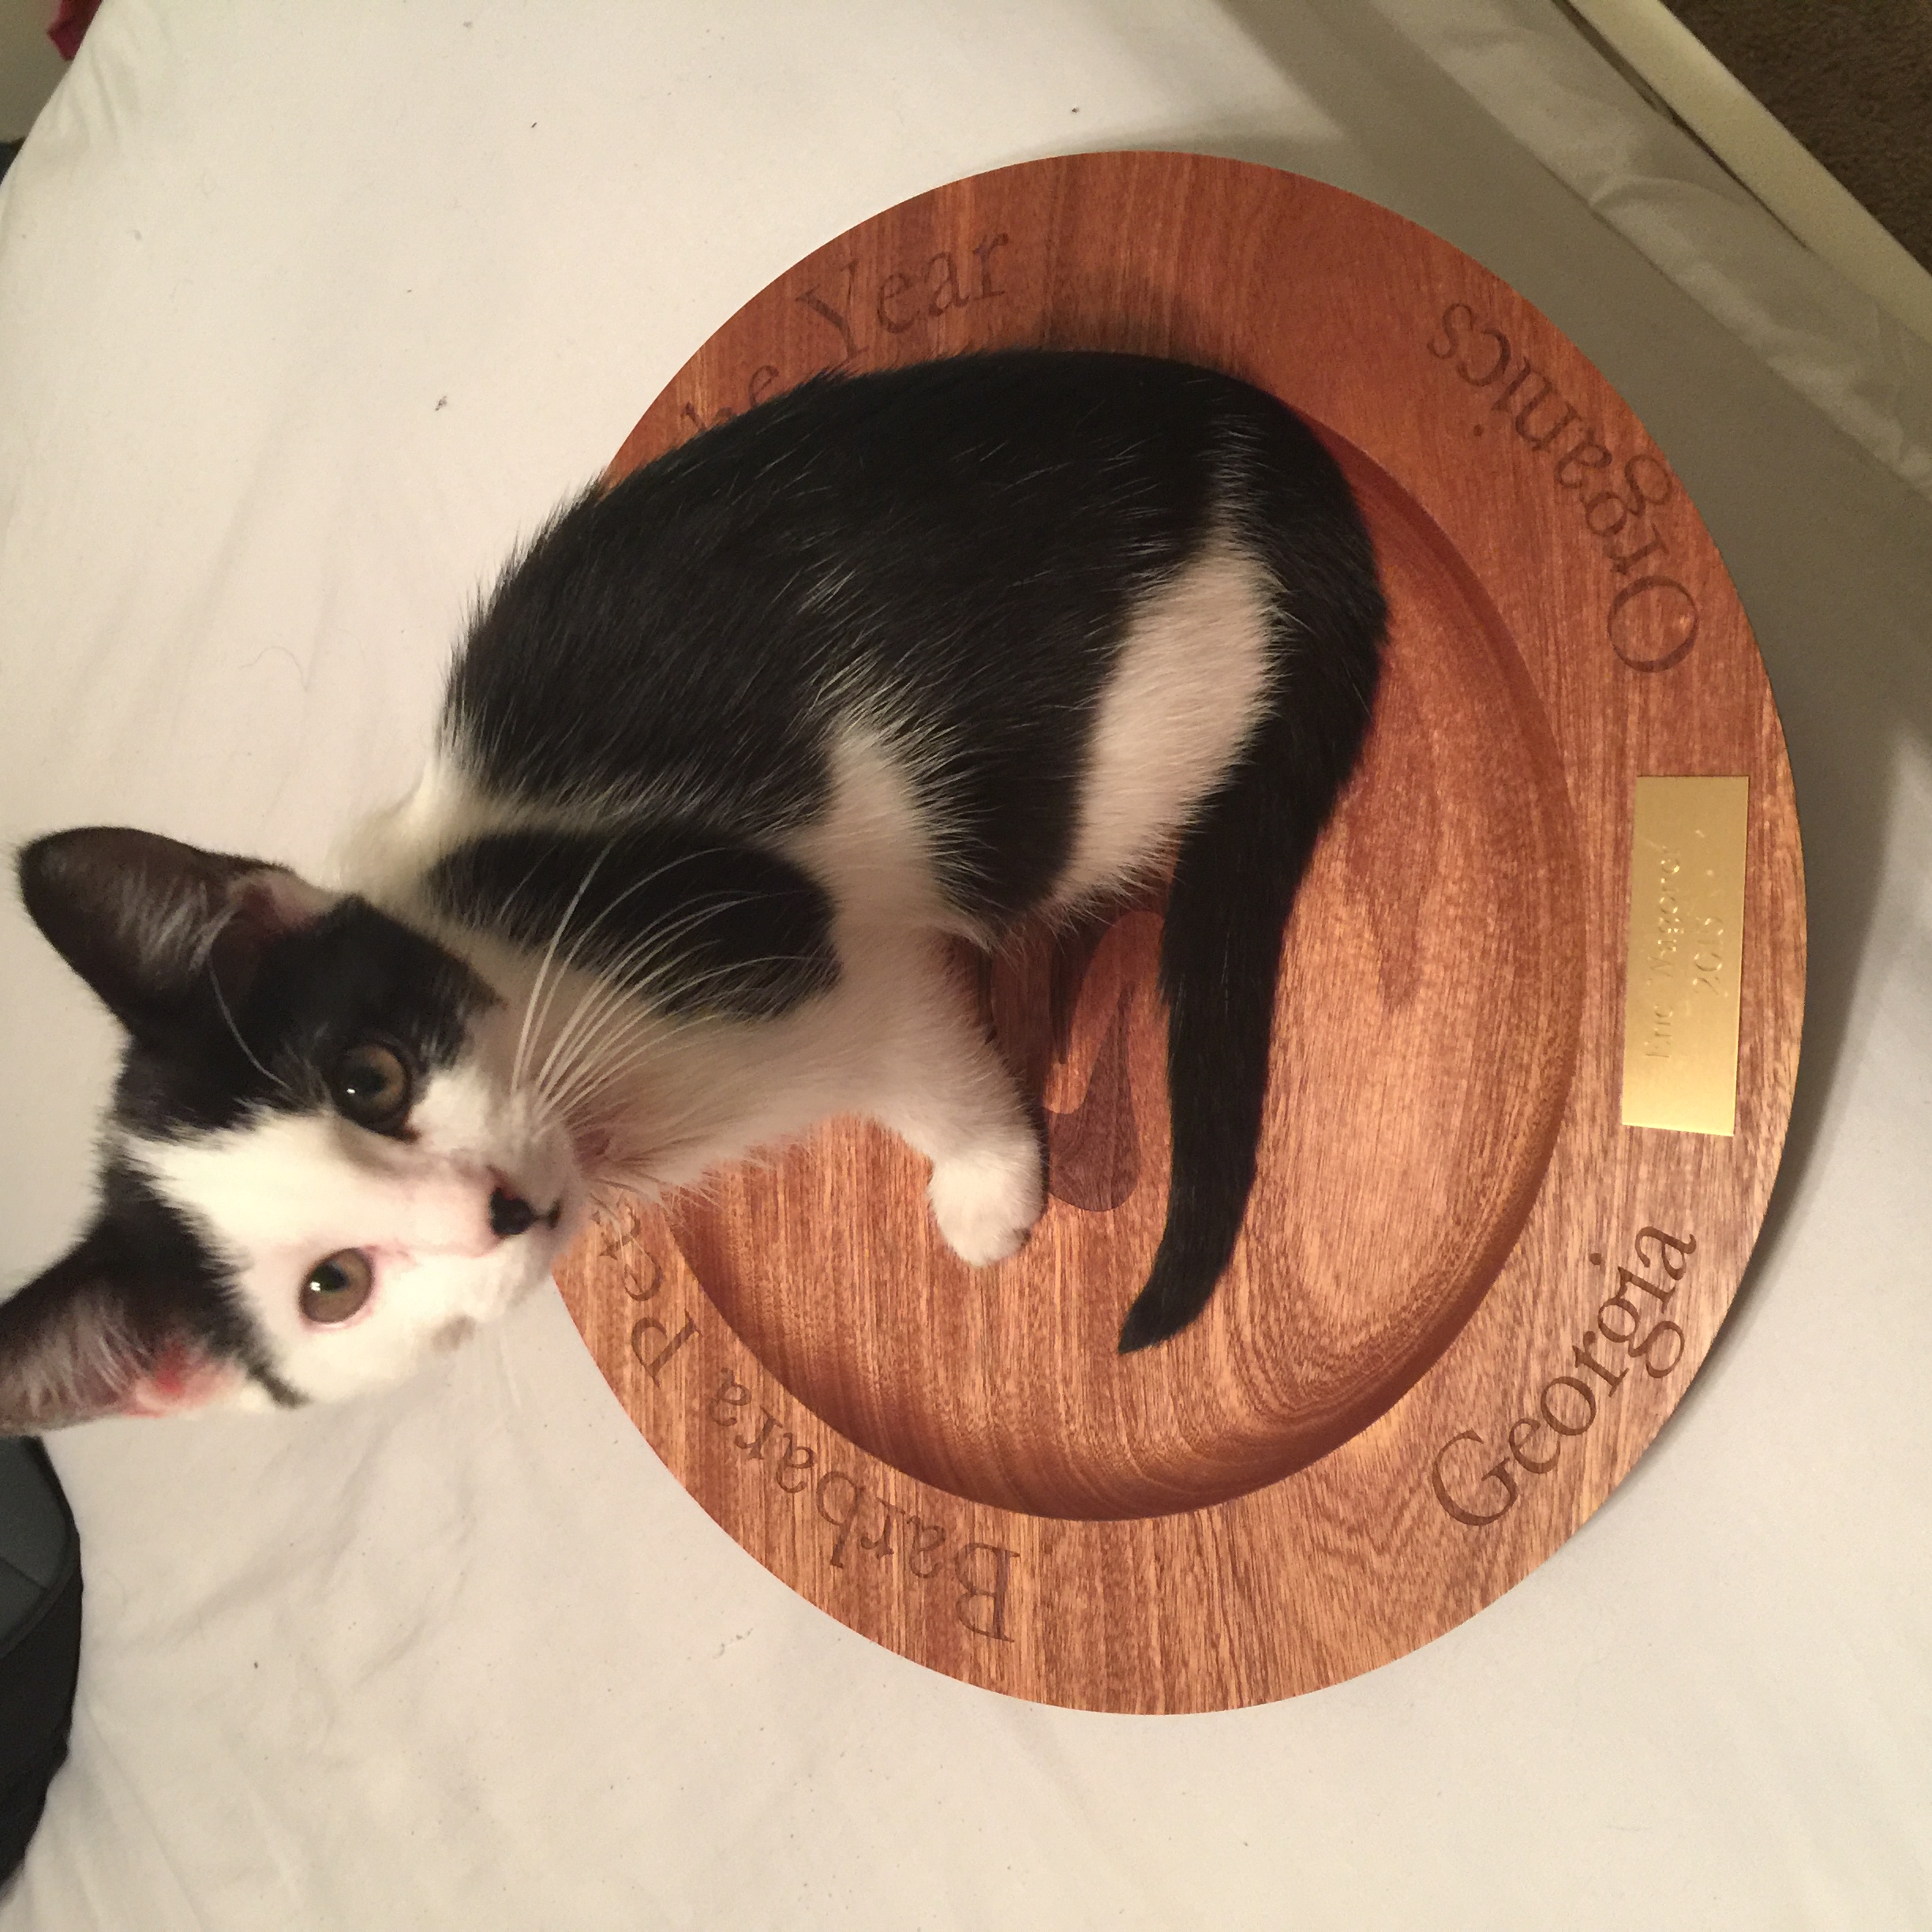 Baby Charlie standing on an award plate